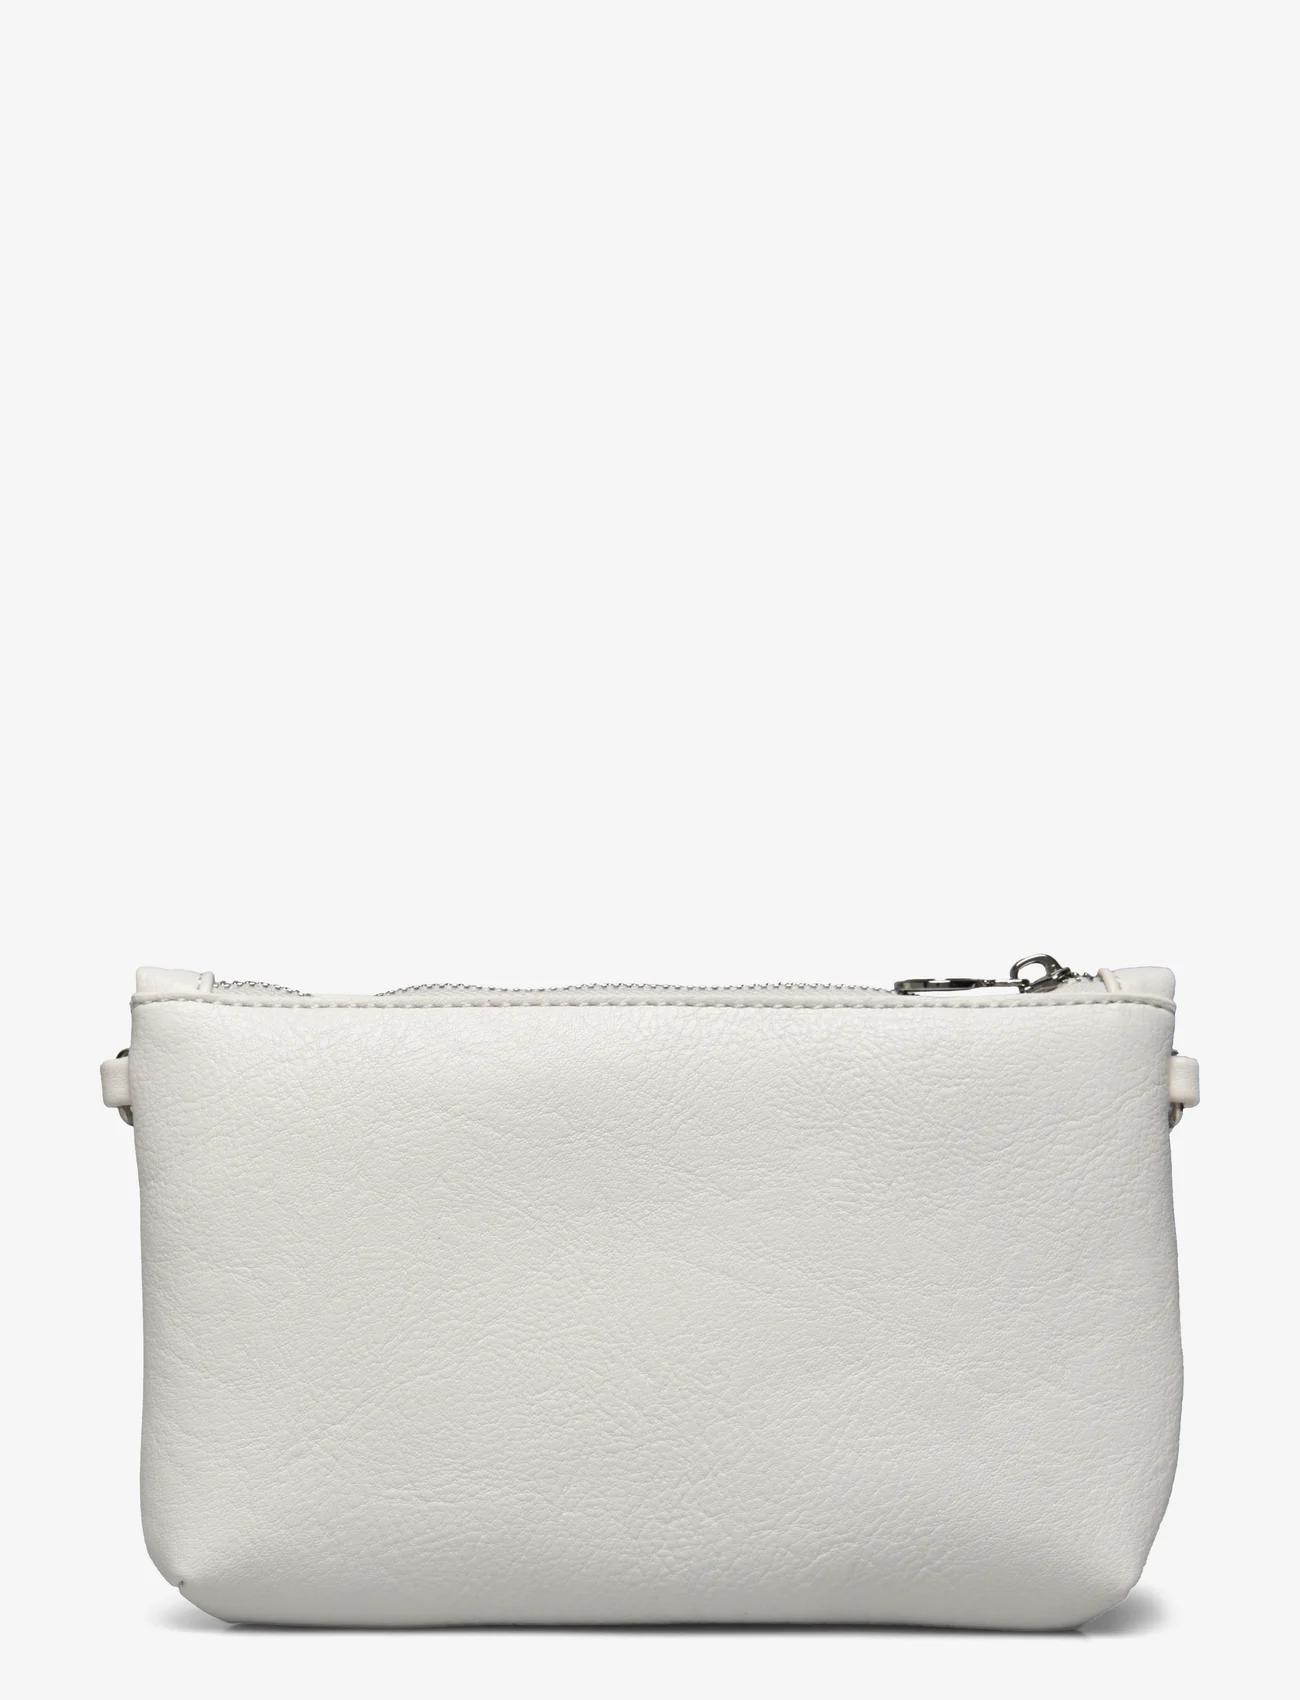 Rosemunde - Clutch - party wear at outlet prices - white silver - 1